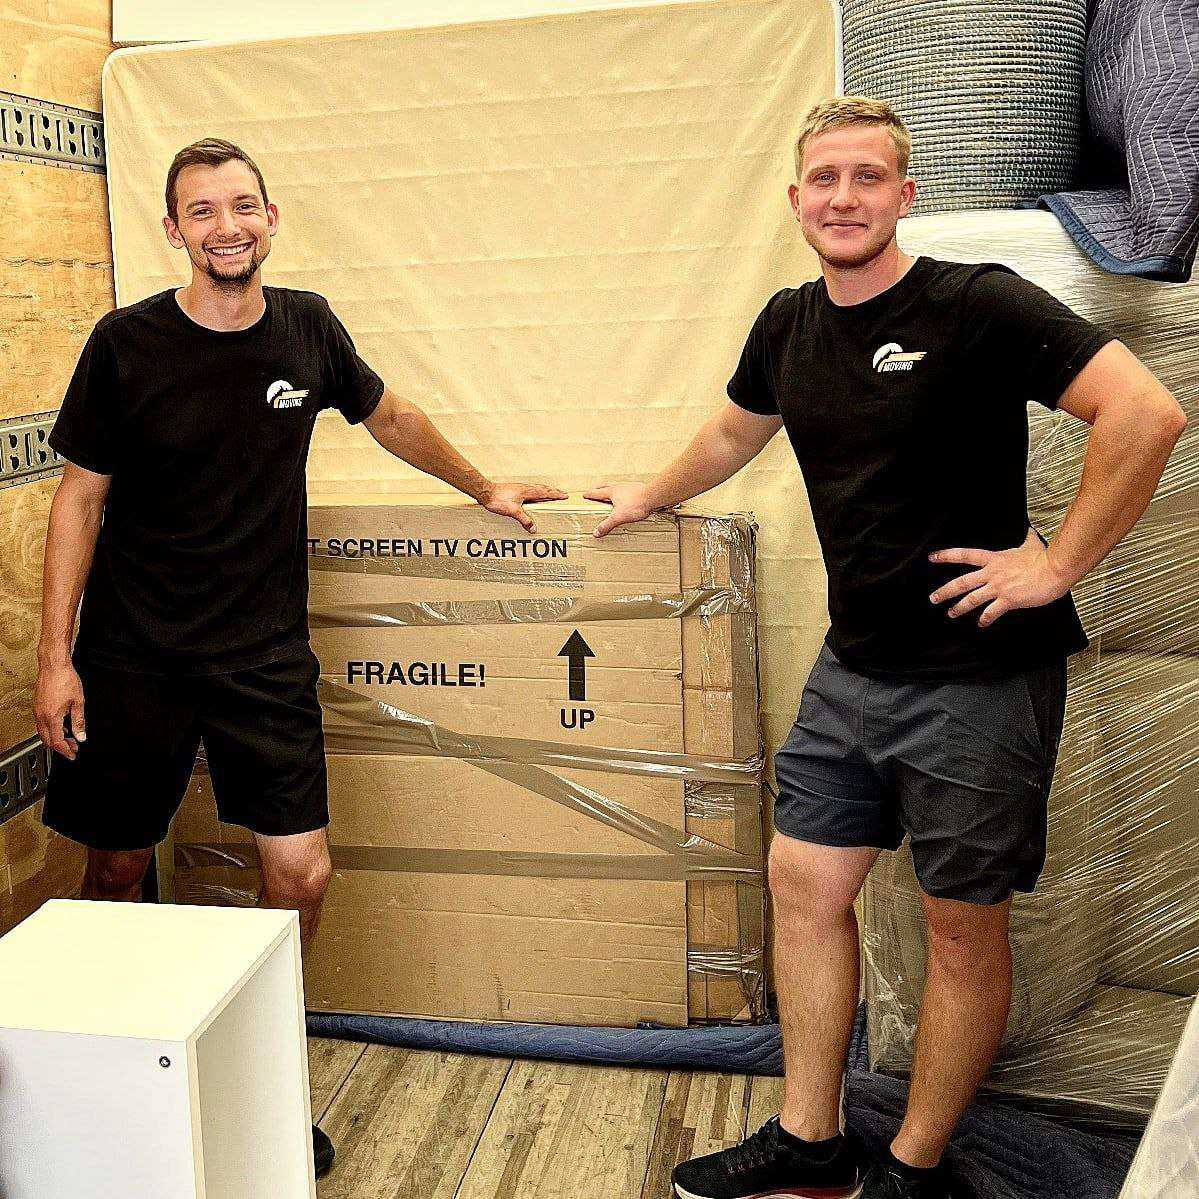 Professional movers carefully packing boxes for Calgary to Winnipeg move